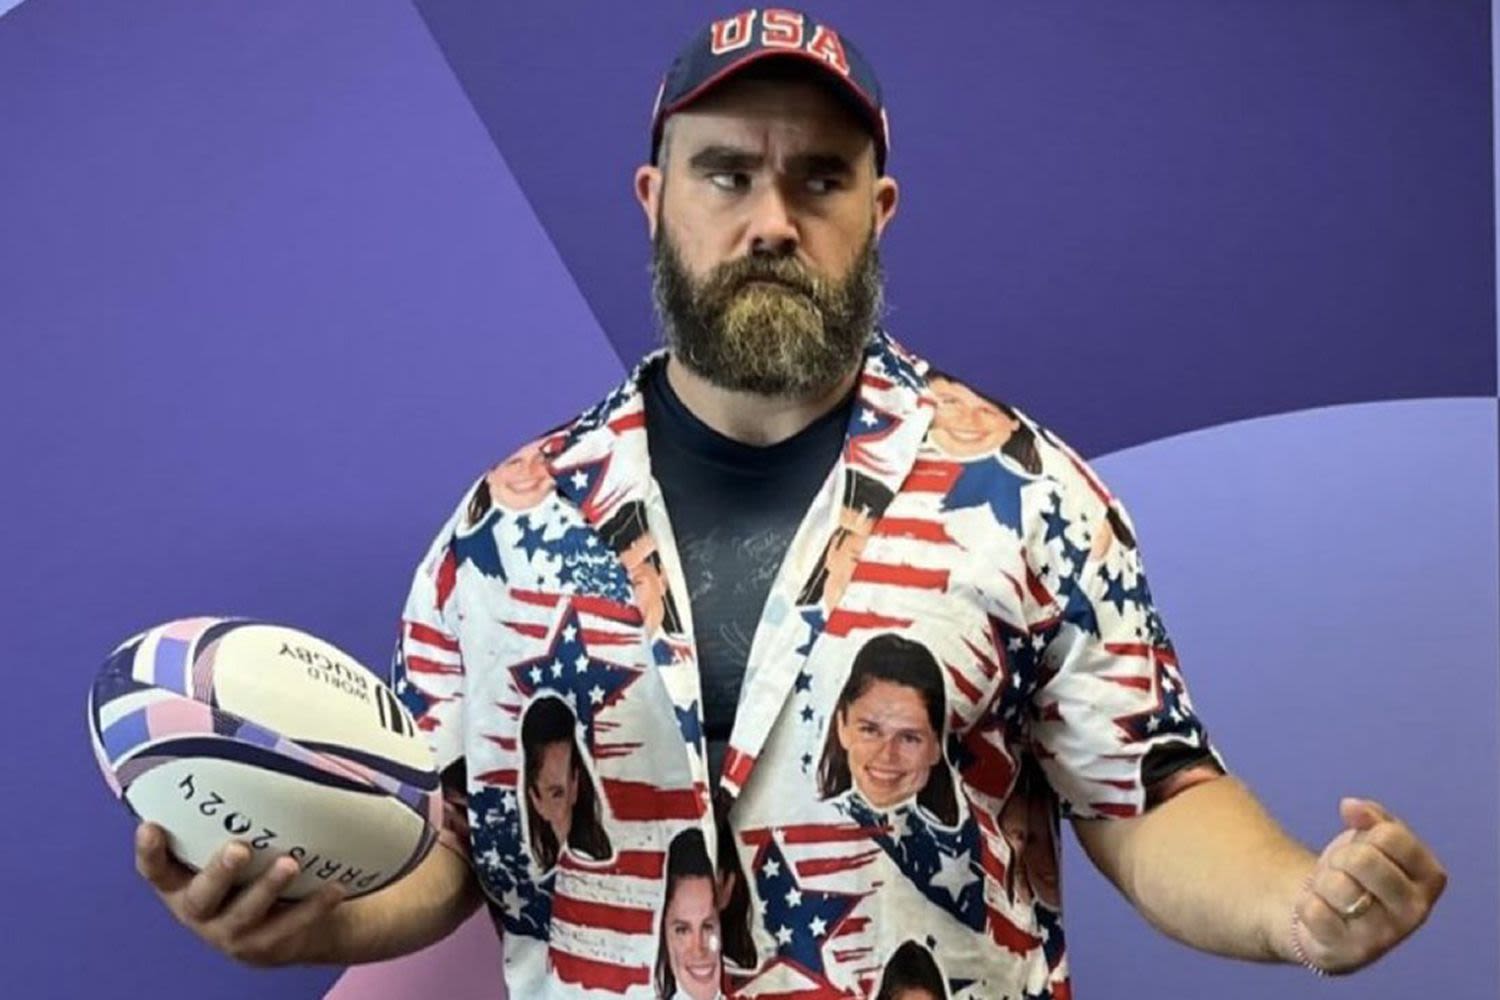 Jason Kelce Proves He's the Women's Olympics Rugby Team's No. 1 Fan with Epic Shirt Featuring Ilona Maher's Face